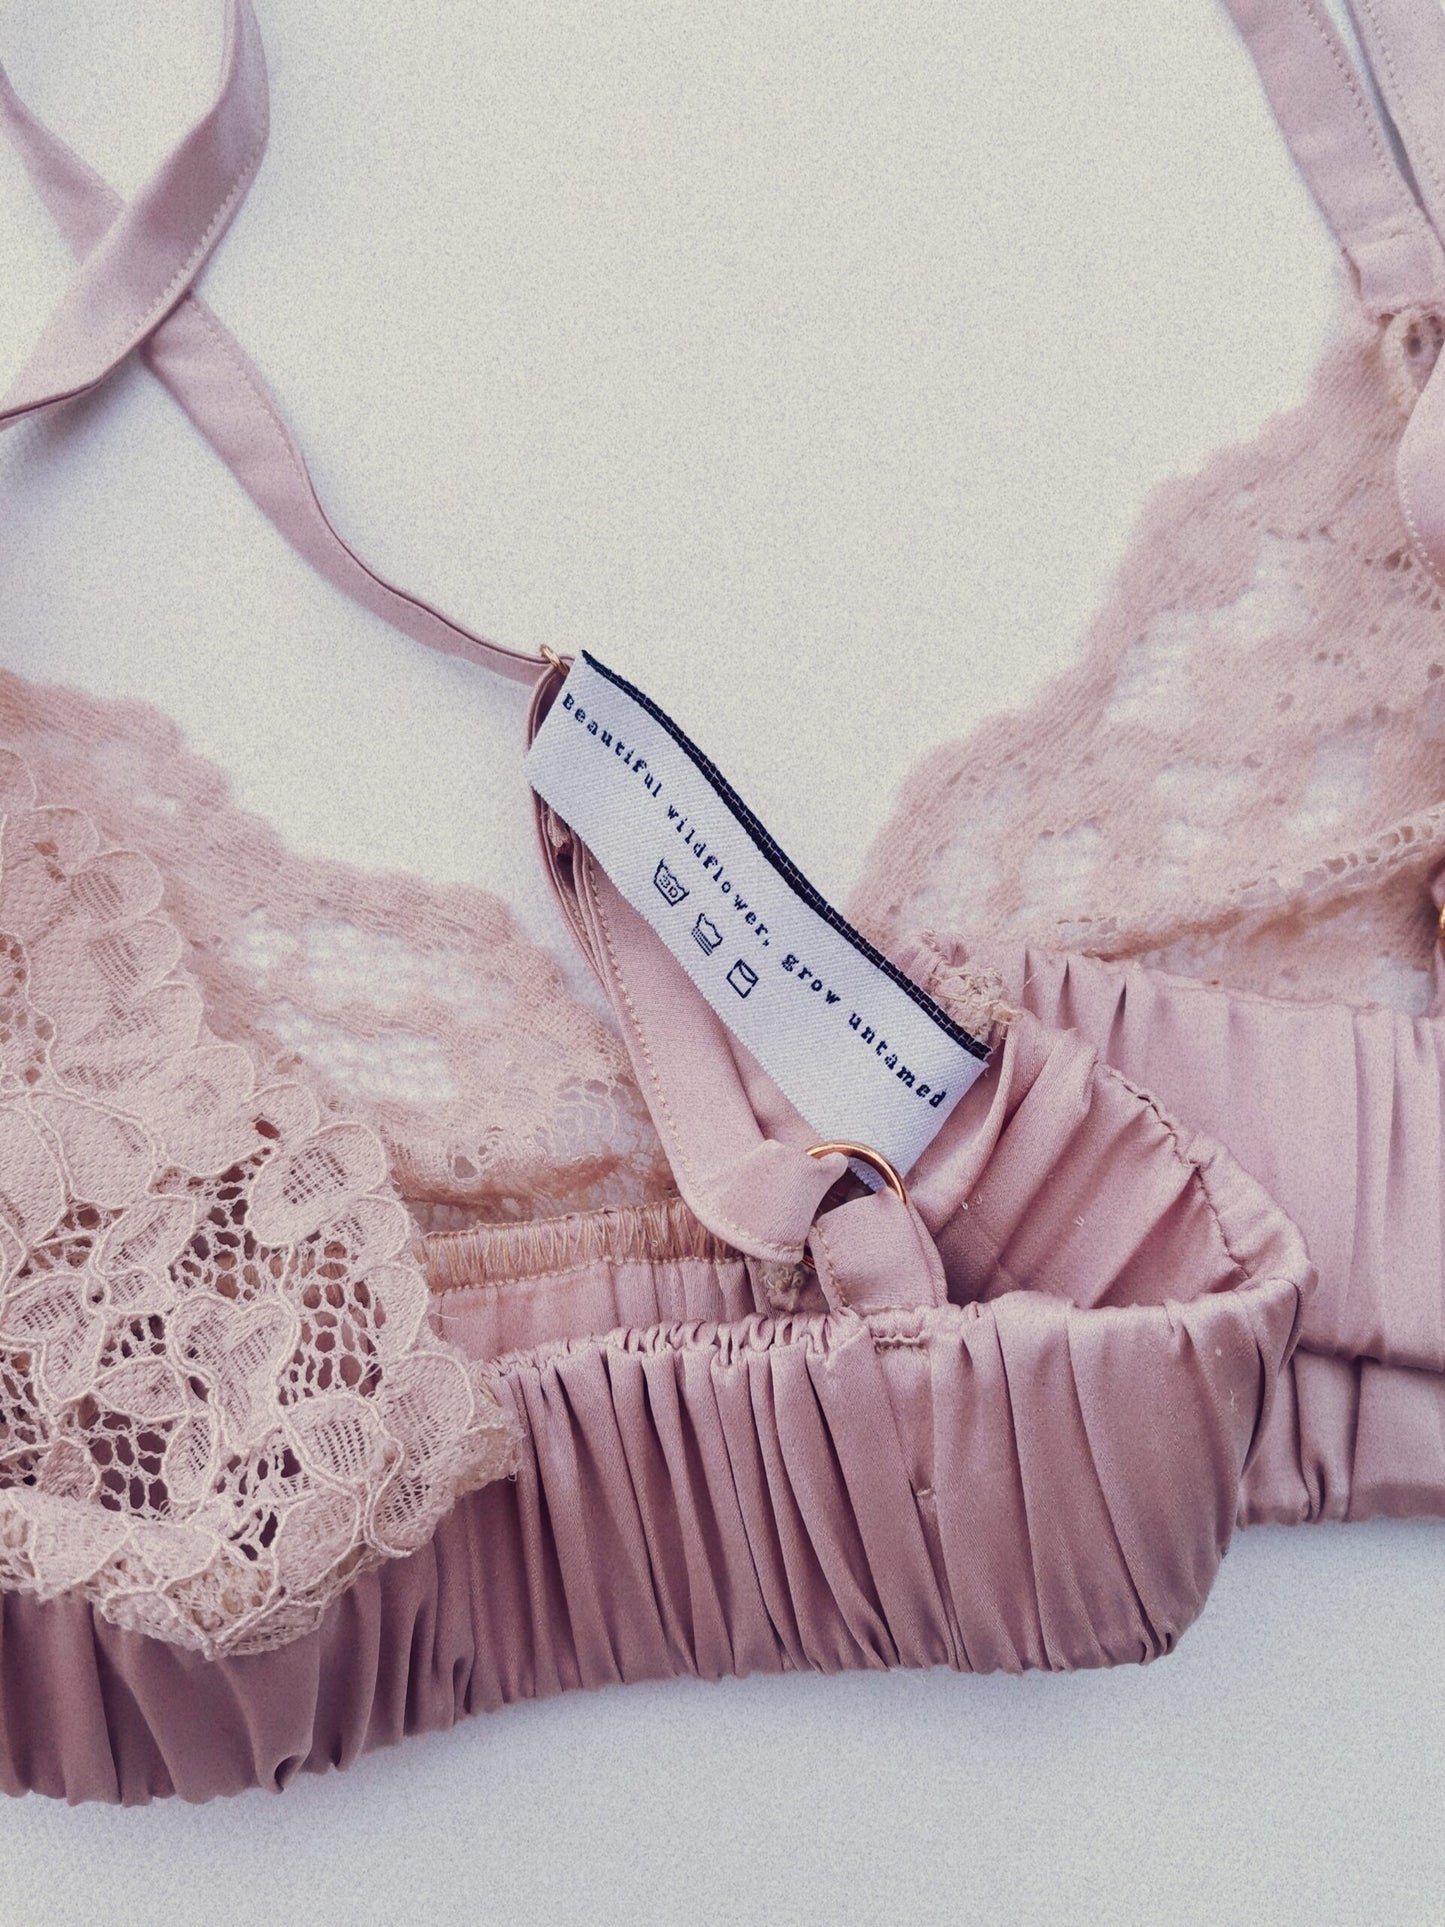 Bespoke pink lace bralet made by South African linen clothing and lounge wear designers.